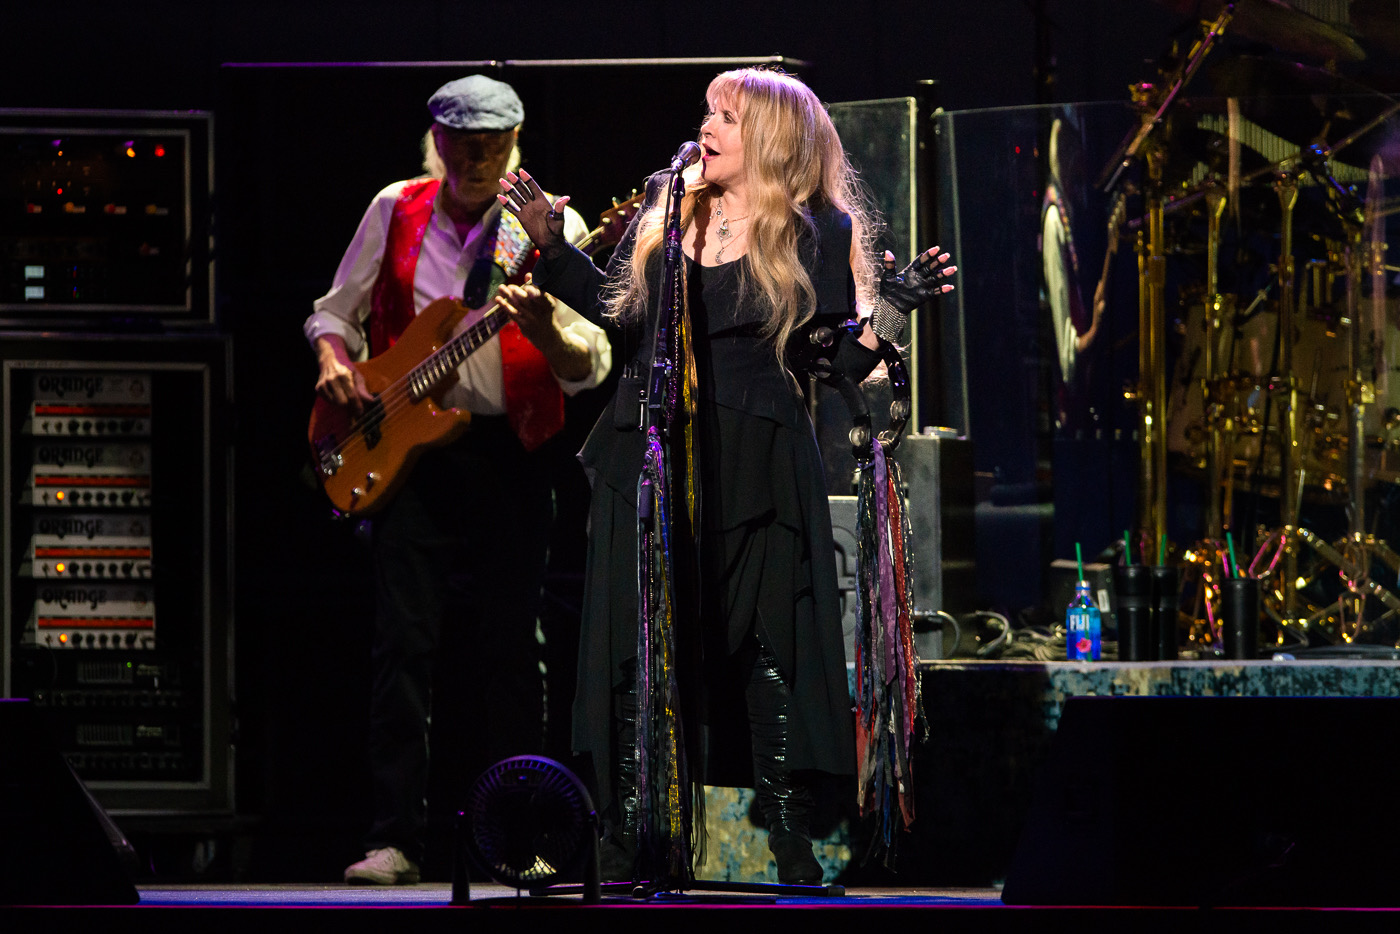 LIVE REVIEW Fleetwood Mac Perth 9th August 2019 The Rockpit